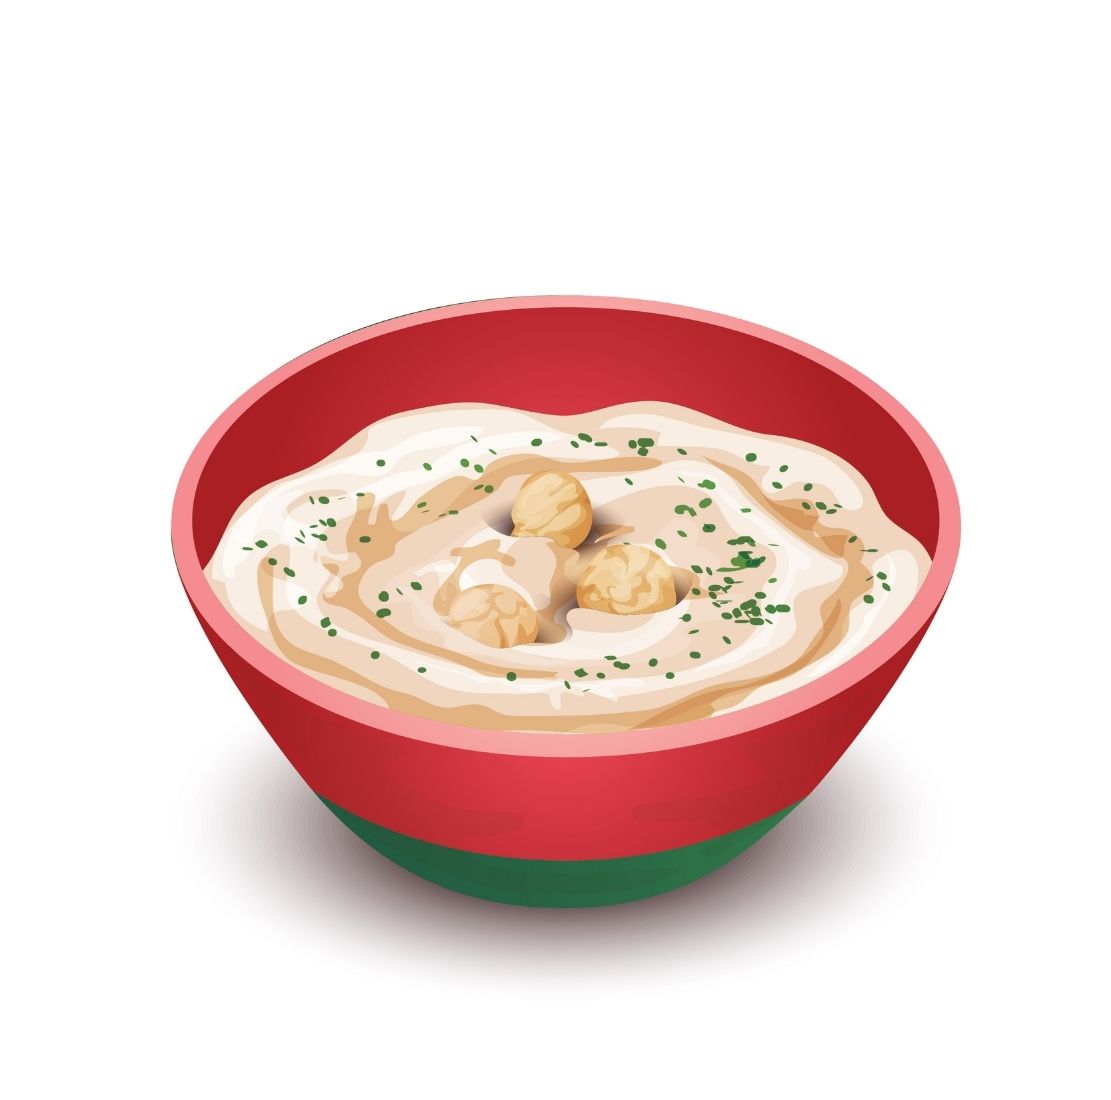 Enjoy your handmade delicious hummus made with chickpeas